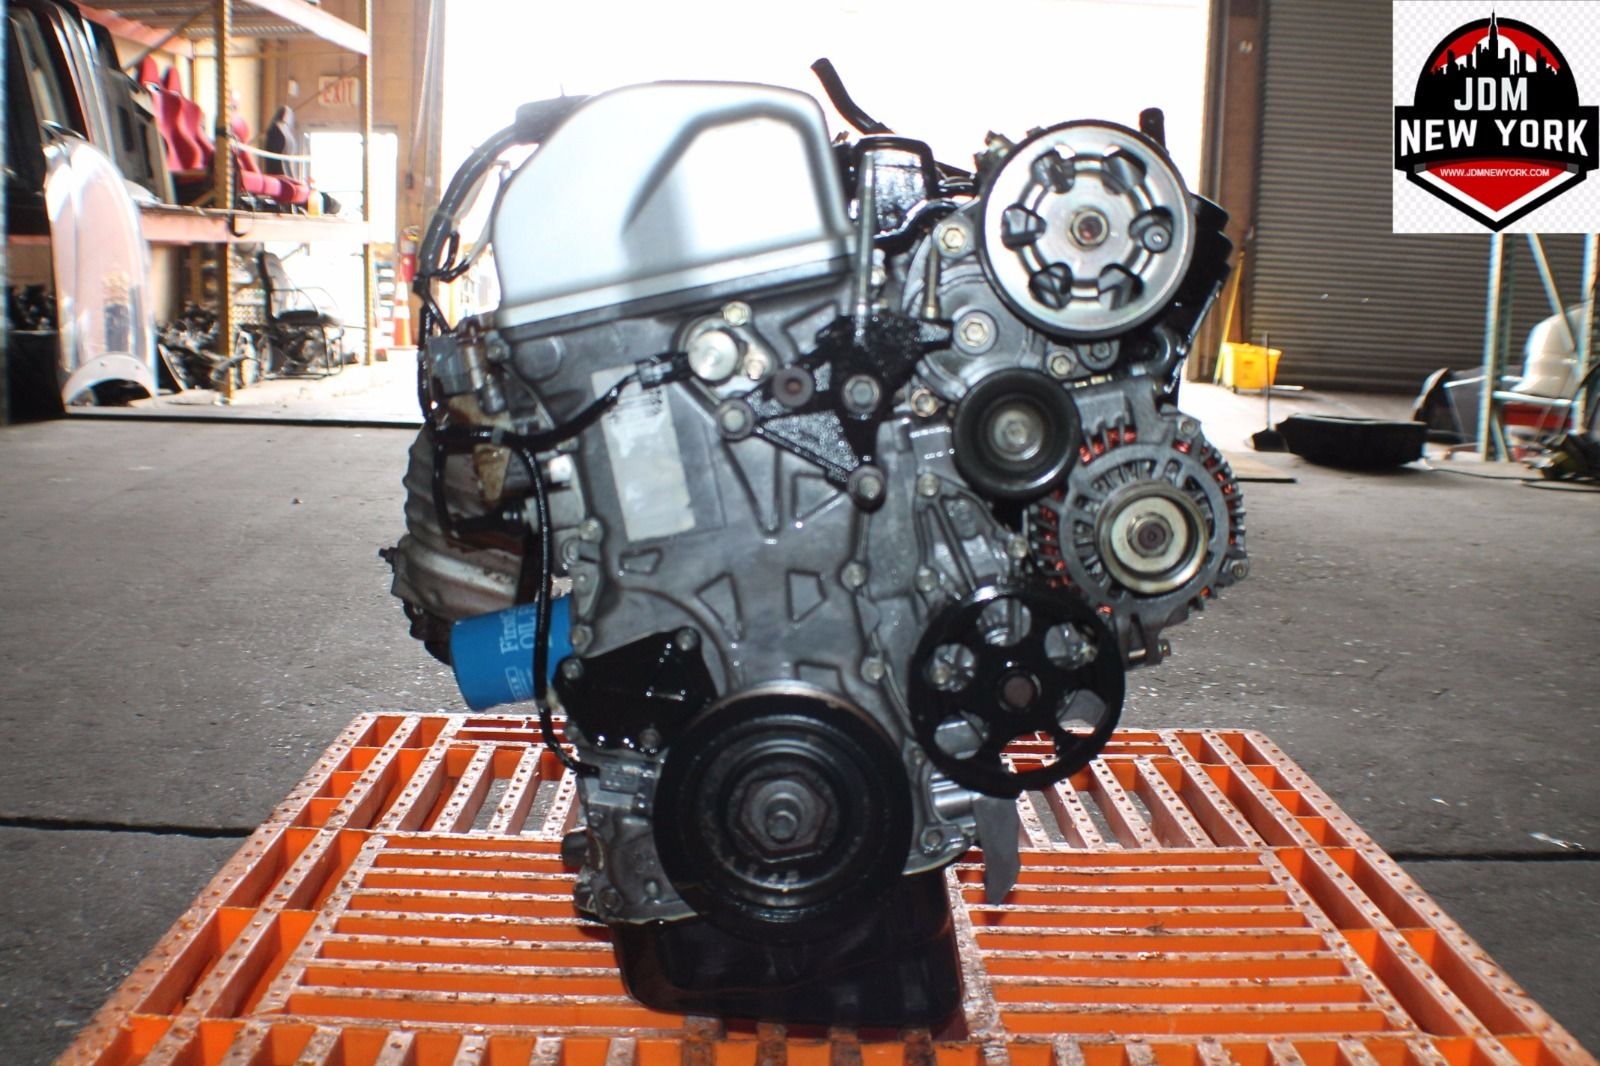 20022004 HONDA CRV CRV 4CYL 2.0L REPLACEMENT ENGINE FOR